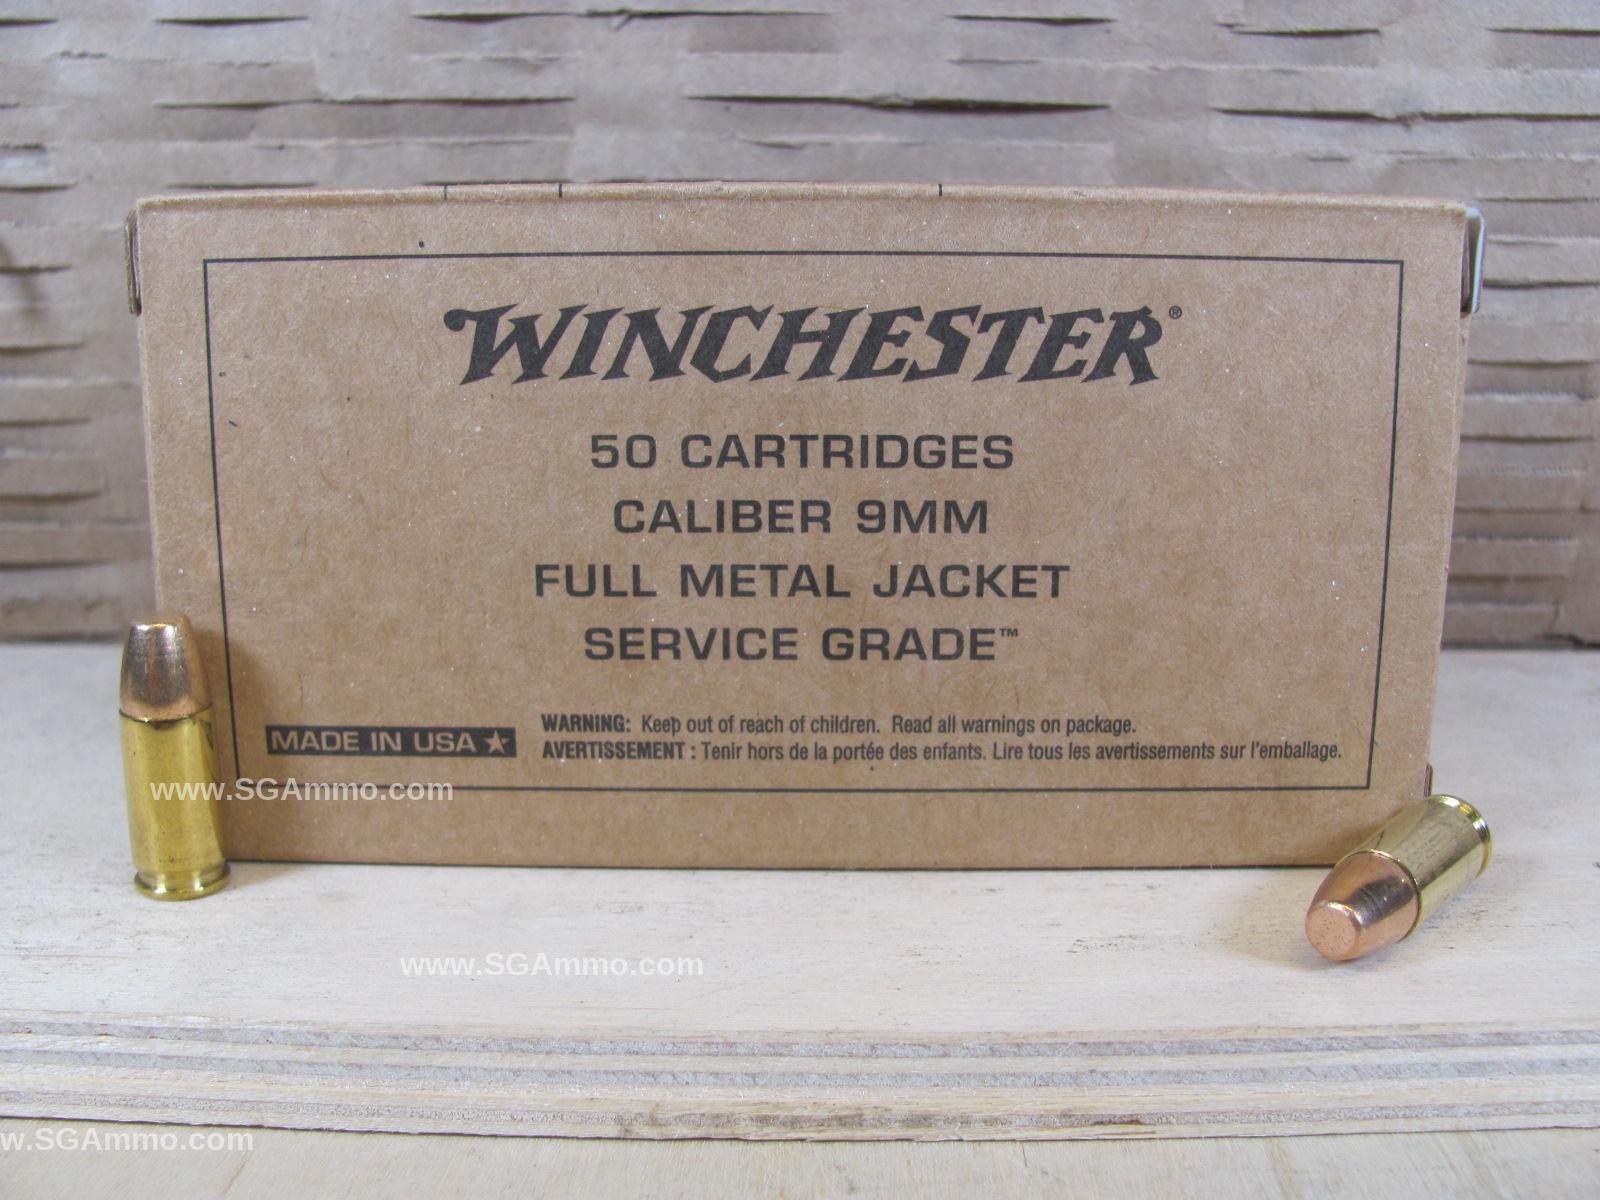 1000 Round Can - 9mm 115 Grain FMJ Winchester High Pressure Service Grade Ammo - SG9W - Packed in Used Metal Canister